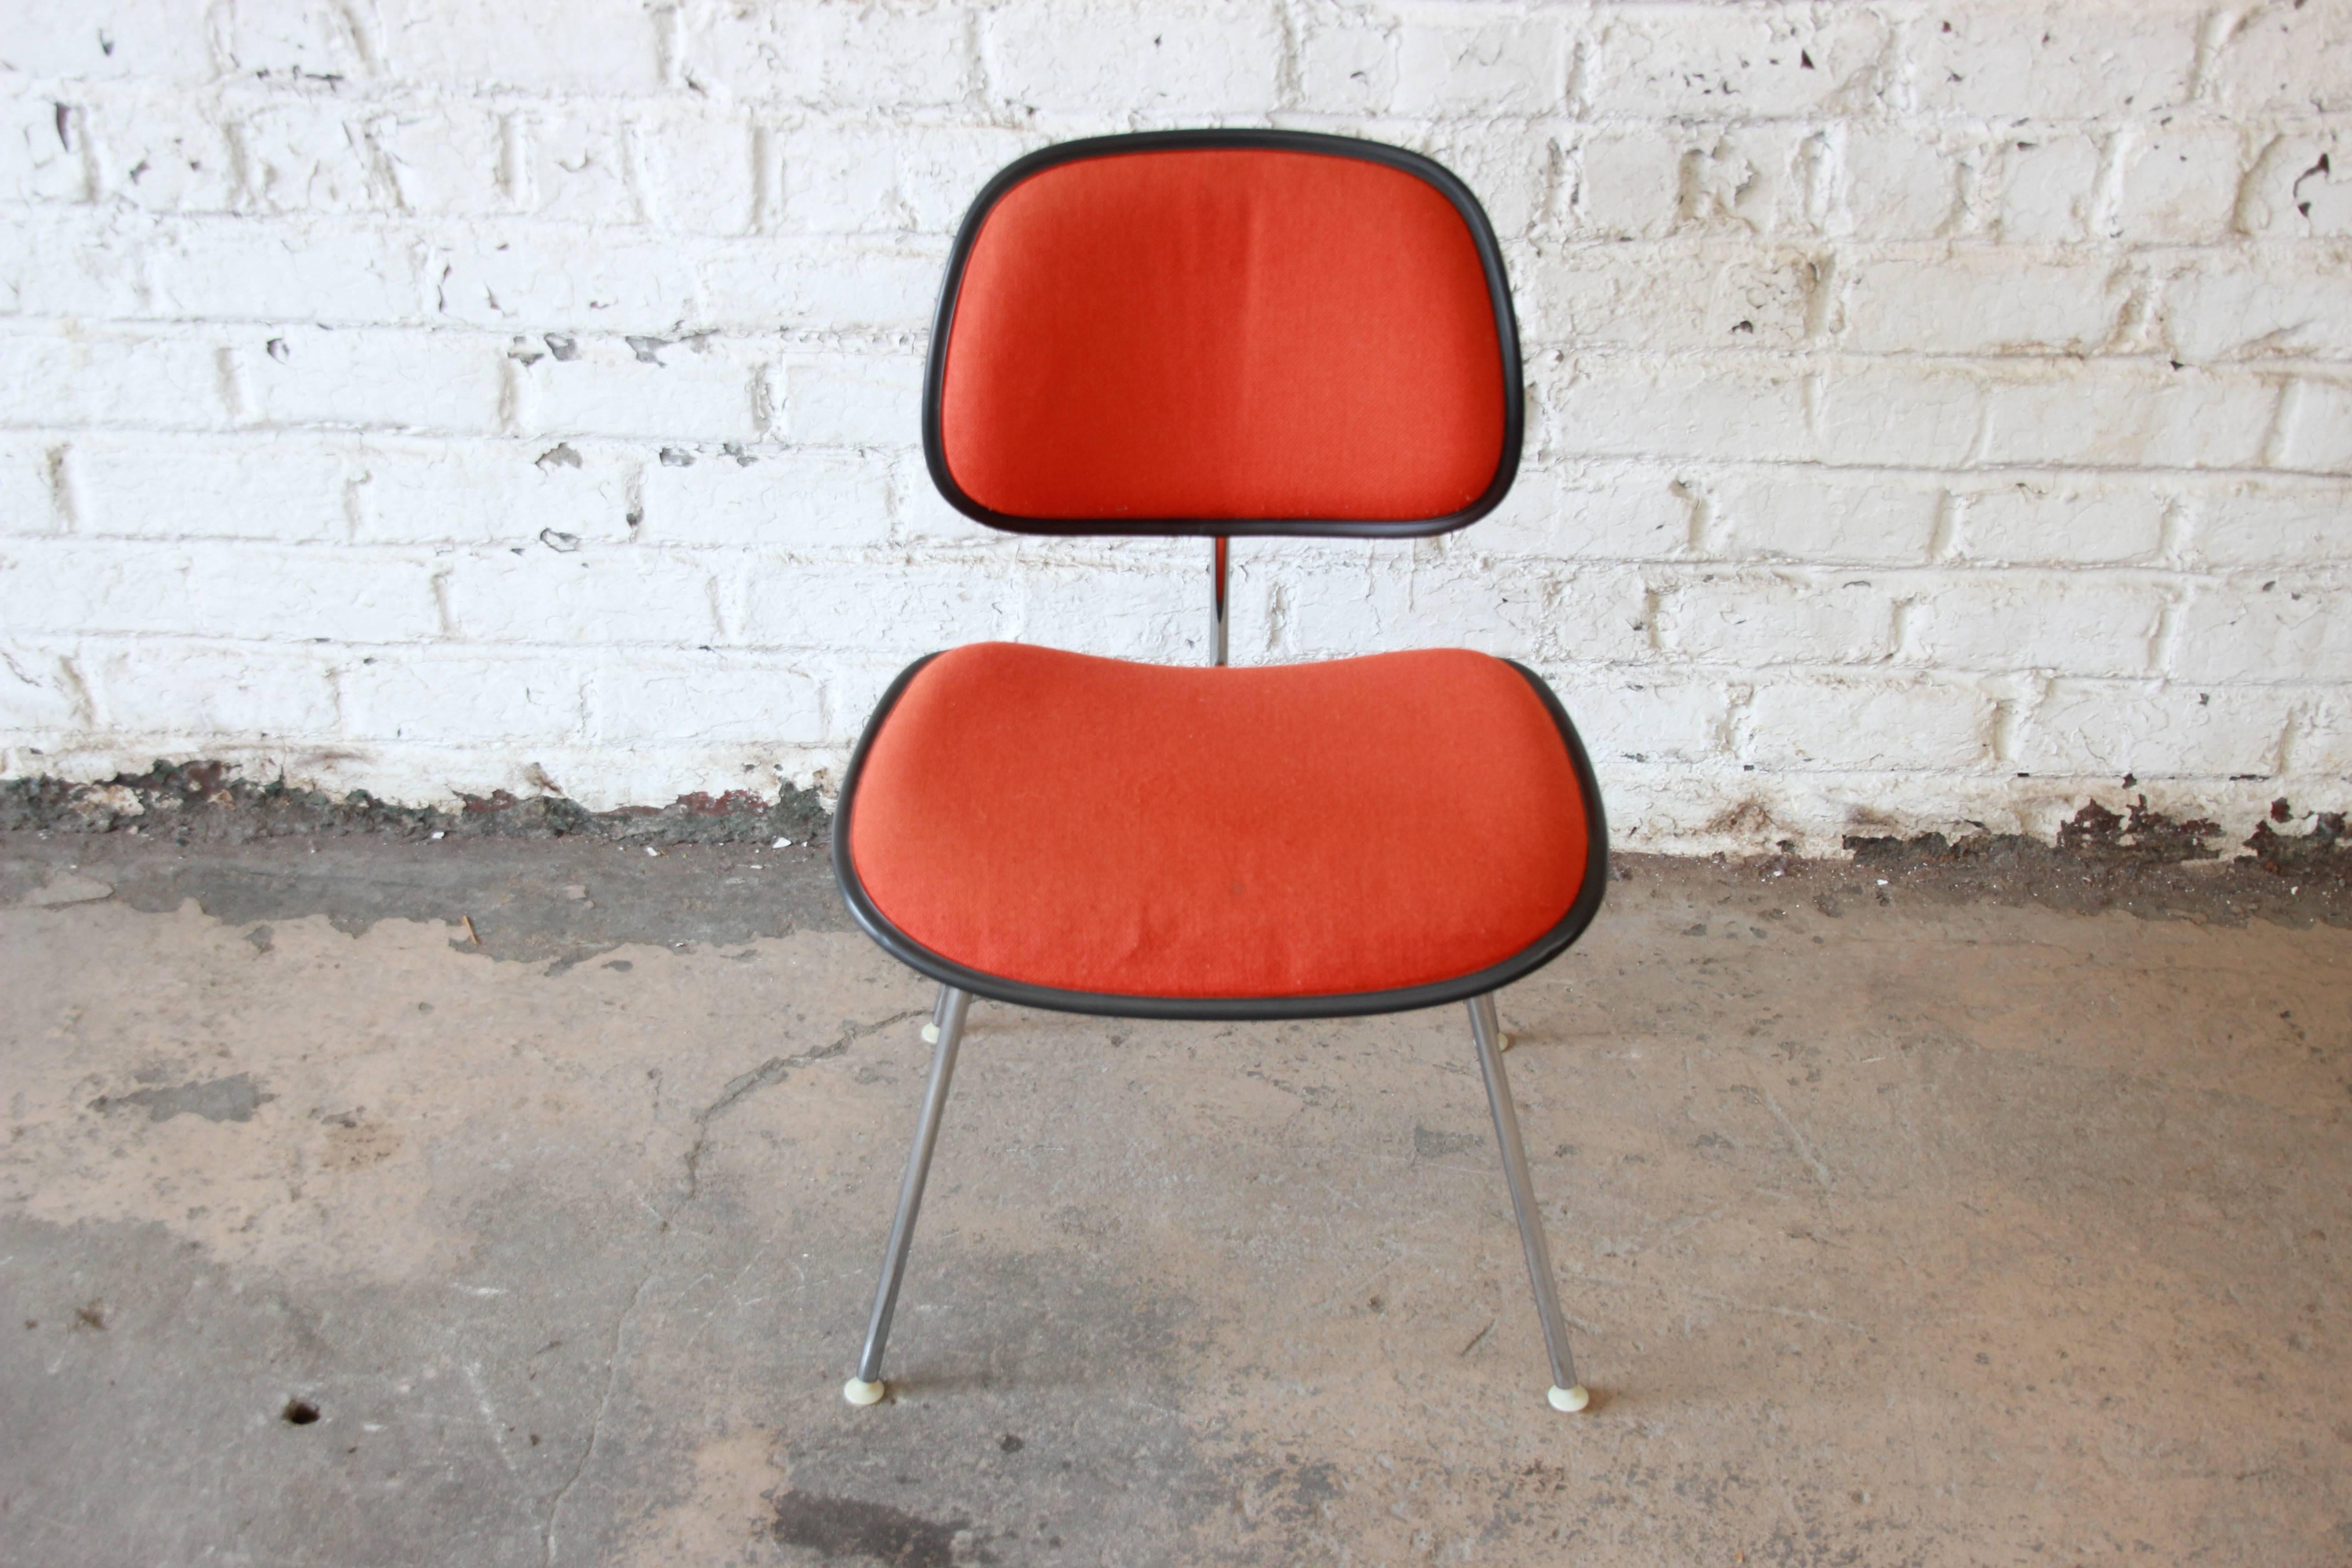 A very nice EC-127 DCM side chair designed by Charles and Ray Eames for Herman Miller, circa 1971-1981. Featuring molded plastic seats and backs with handsome orange wool upholstery. Legs and frame are solid chrome-plated steel. Original Herman